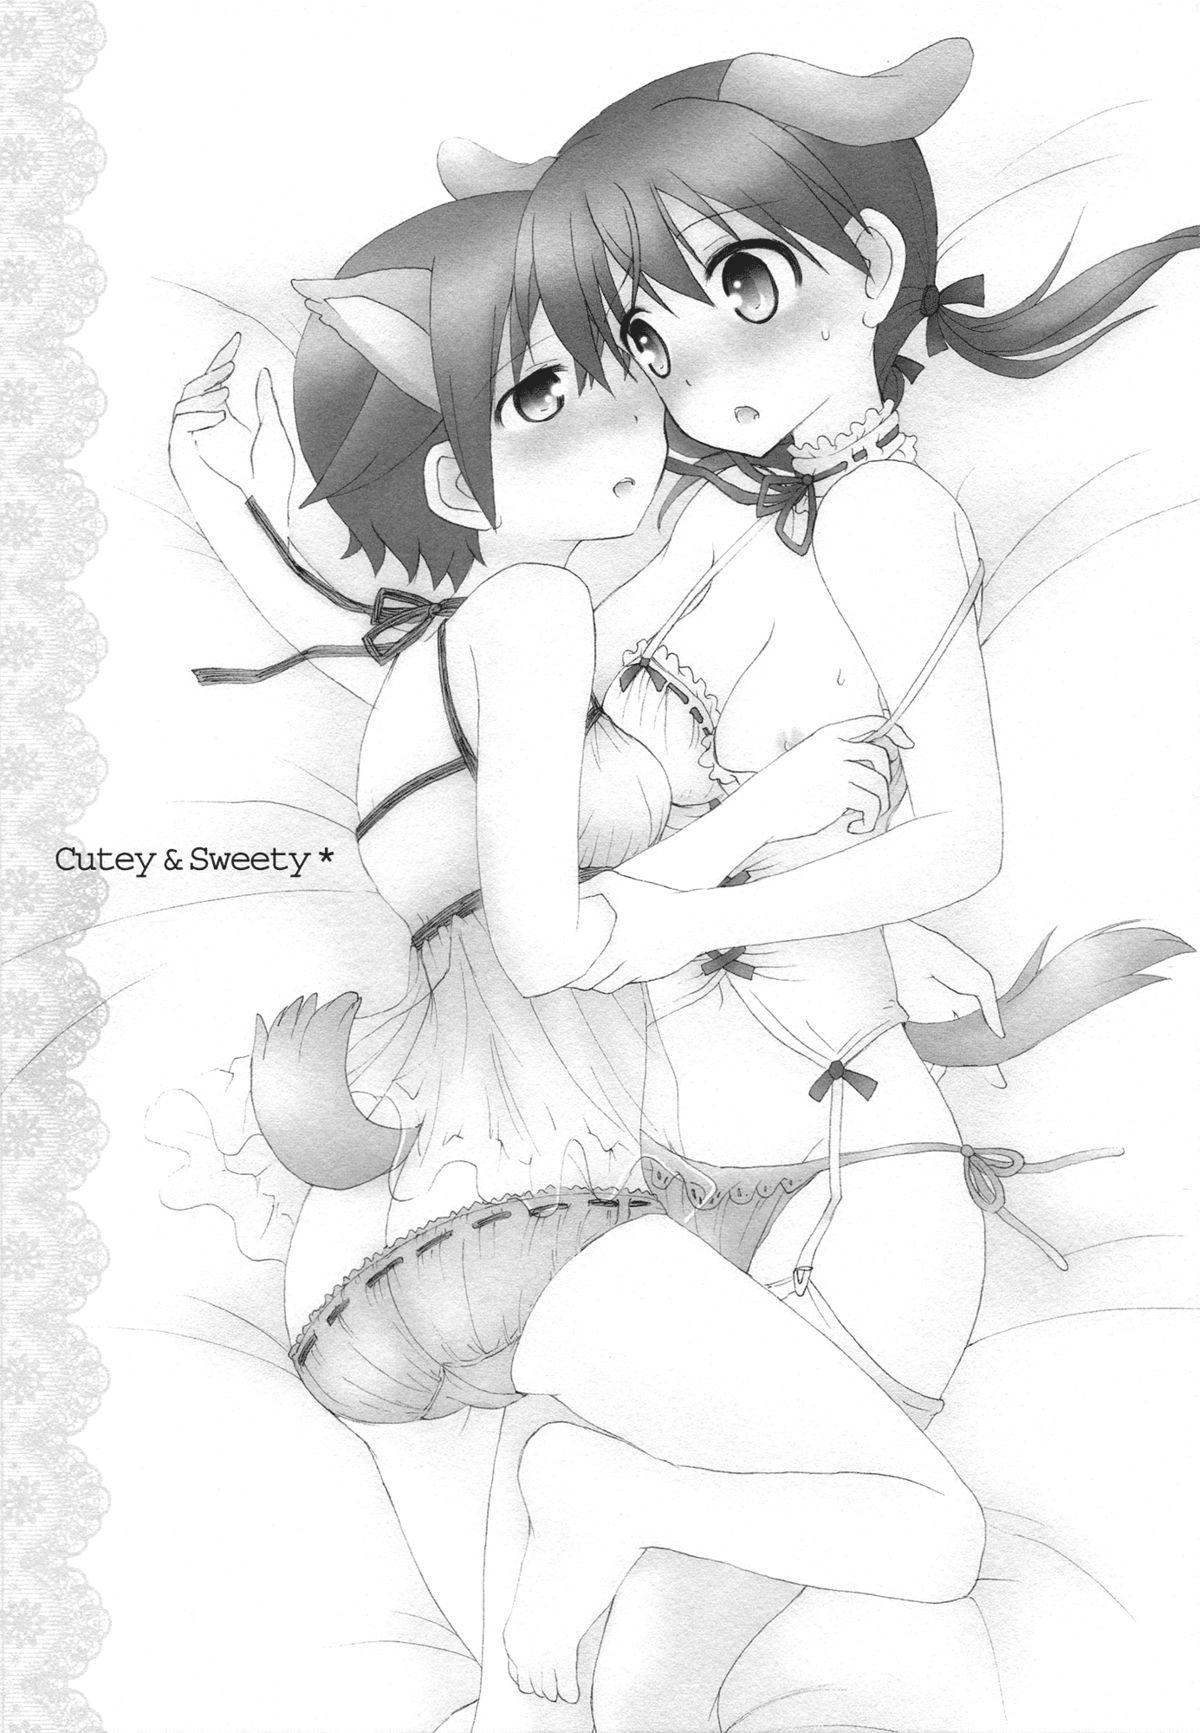 Sloppy Cutey&Sweety - Strike witches Close - Page 2